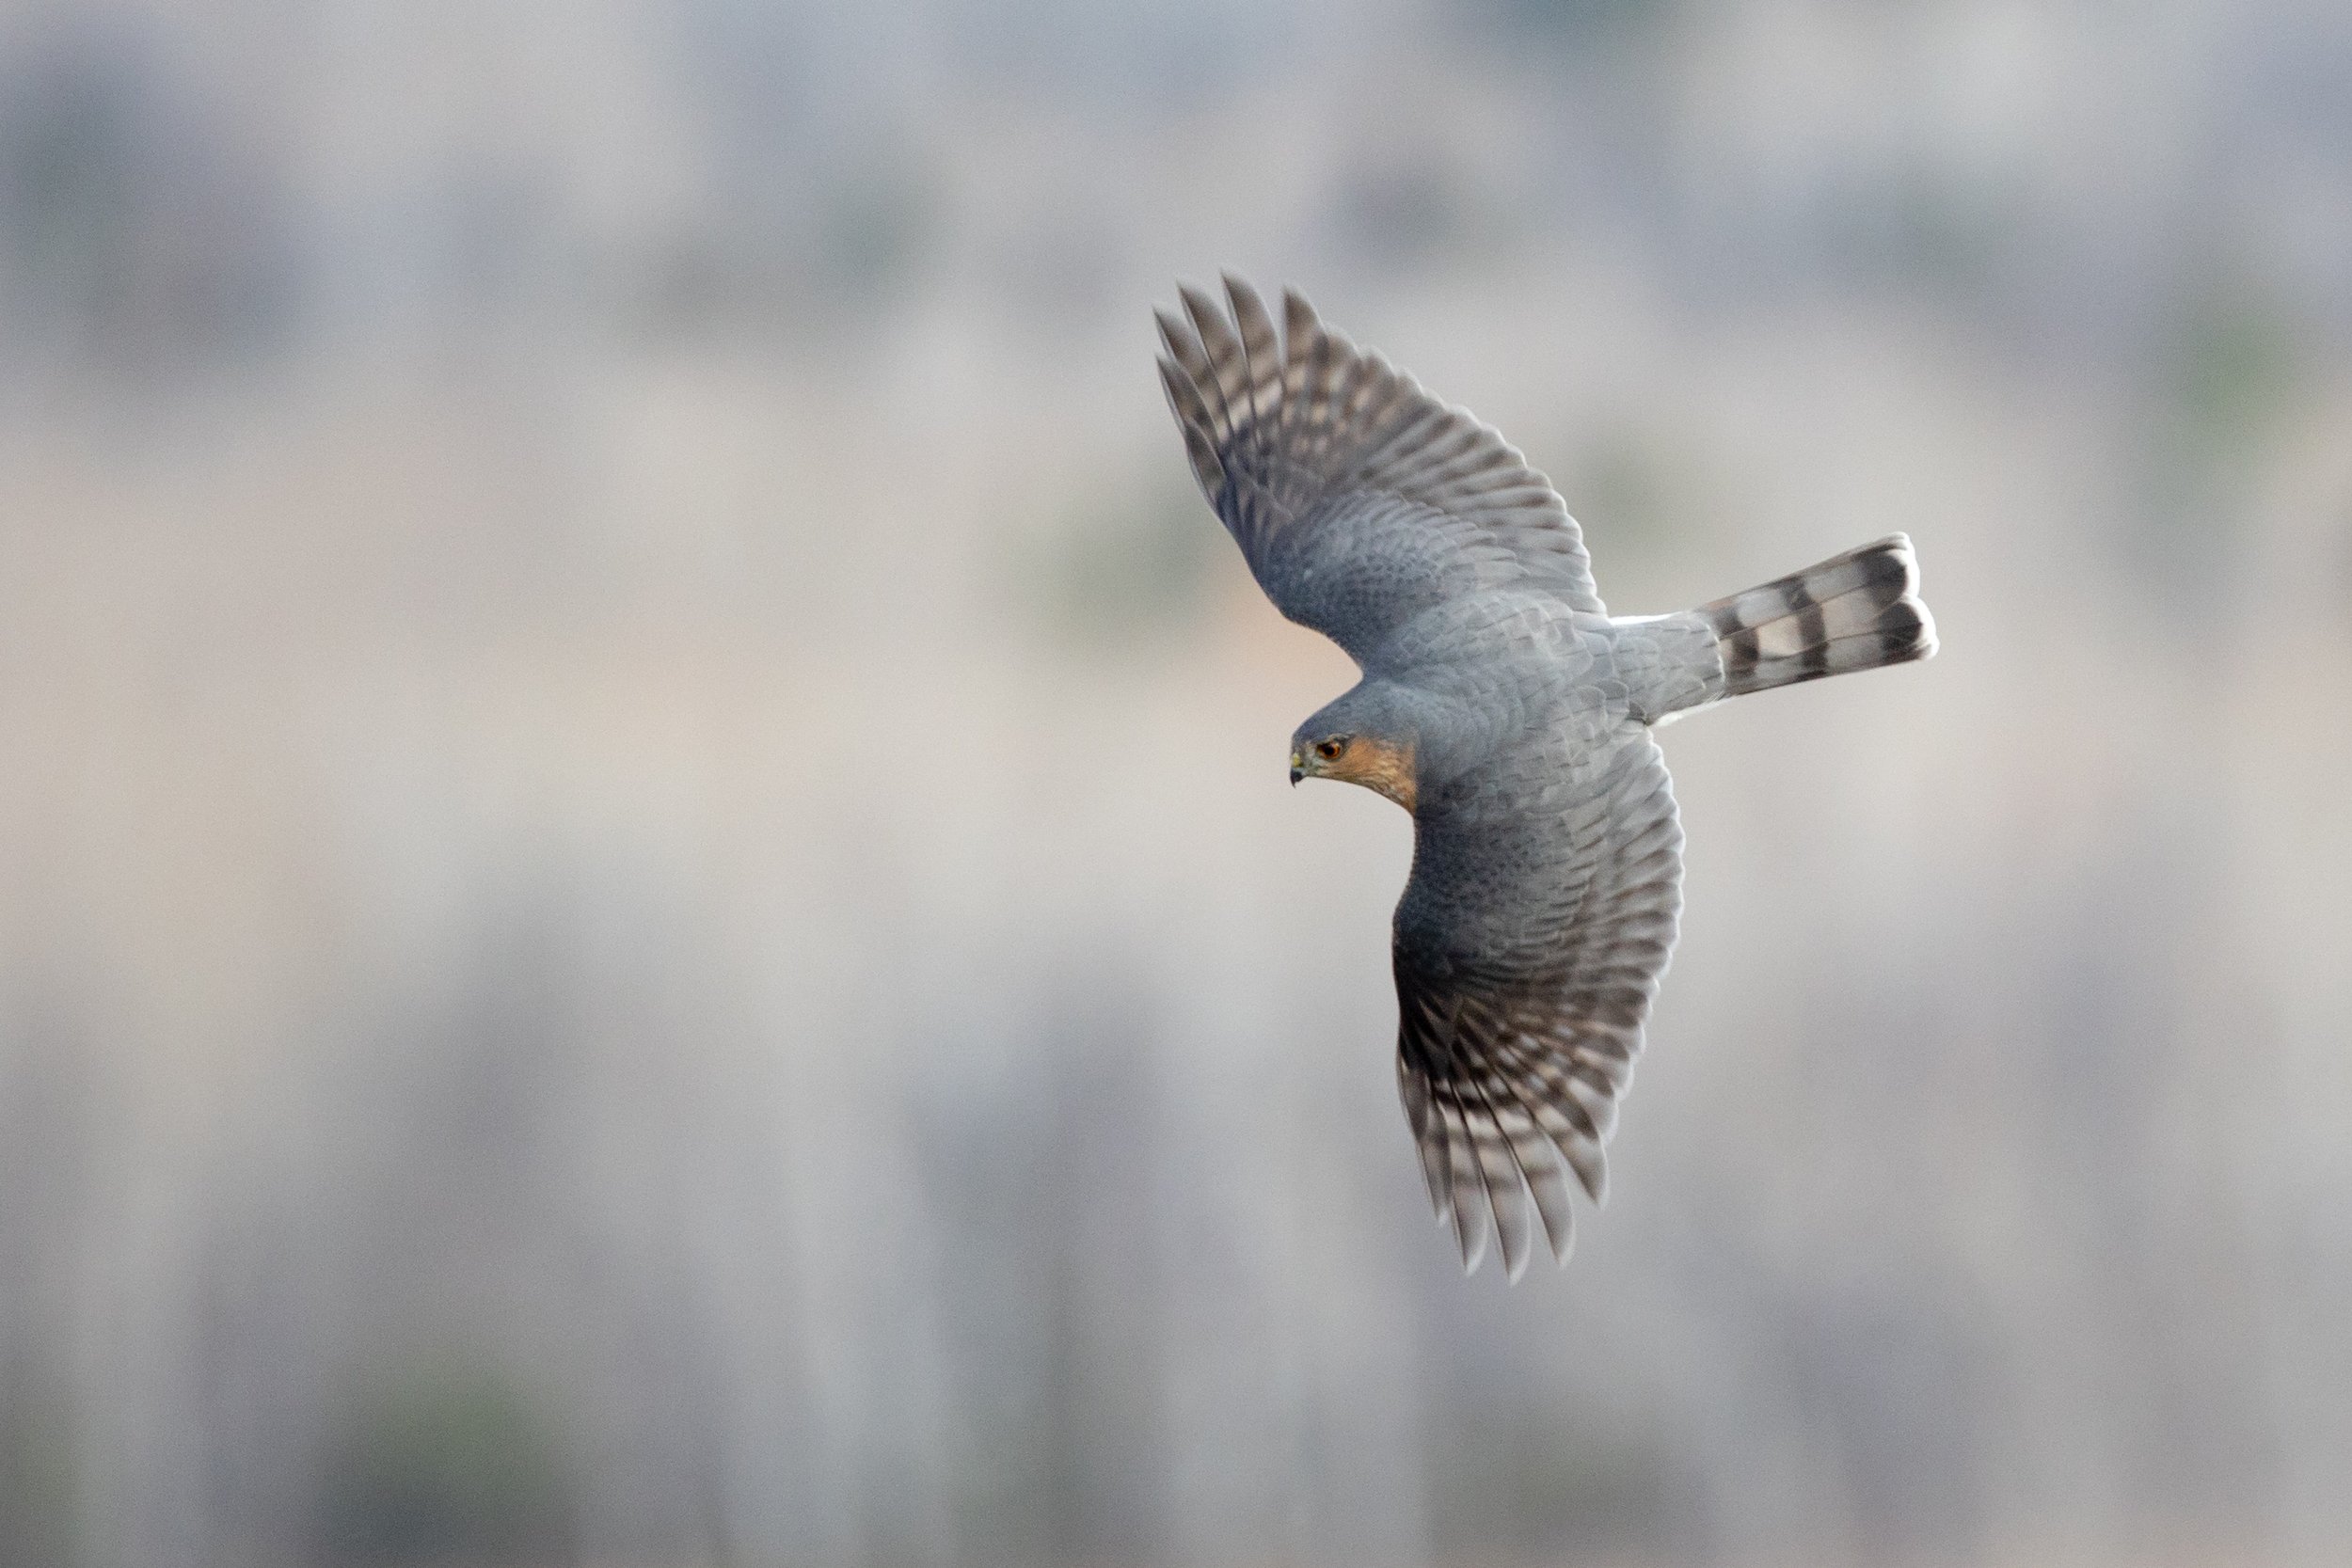 If we are lucky, Hawk Ridge can be a great place to witness close migrants like this adult Sharp-shinned Hawk